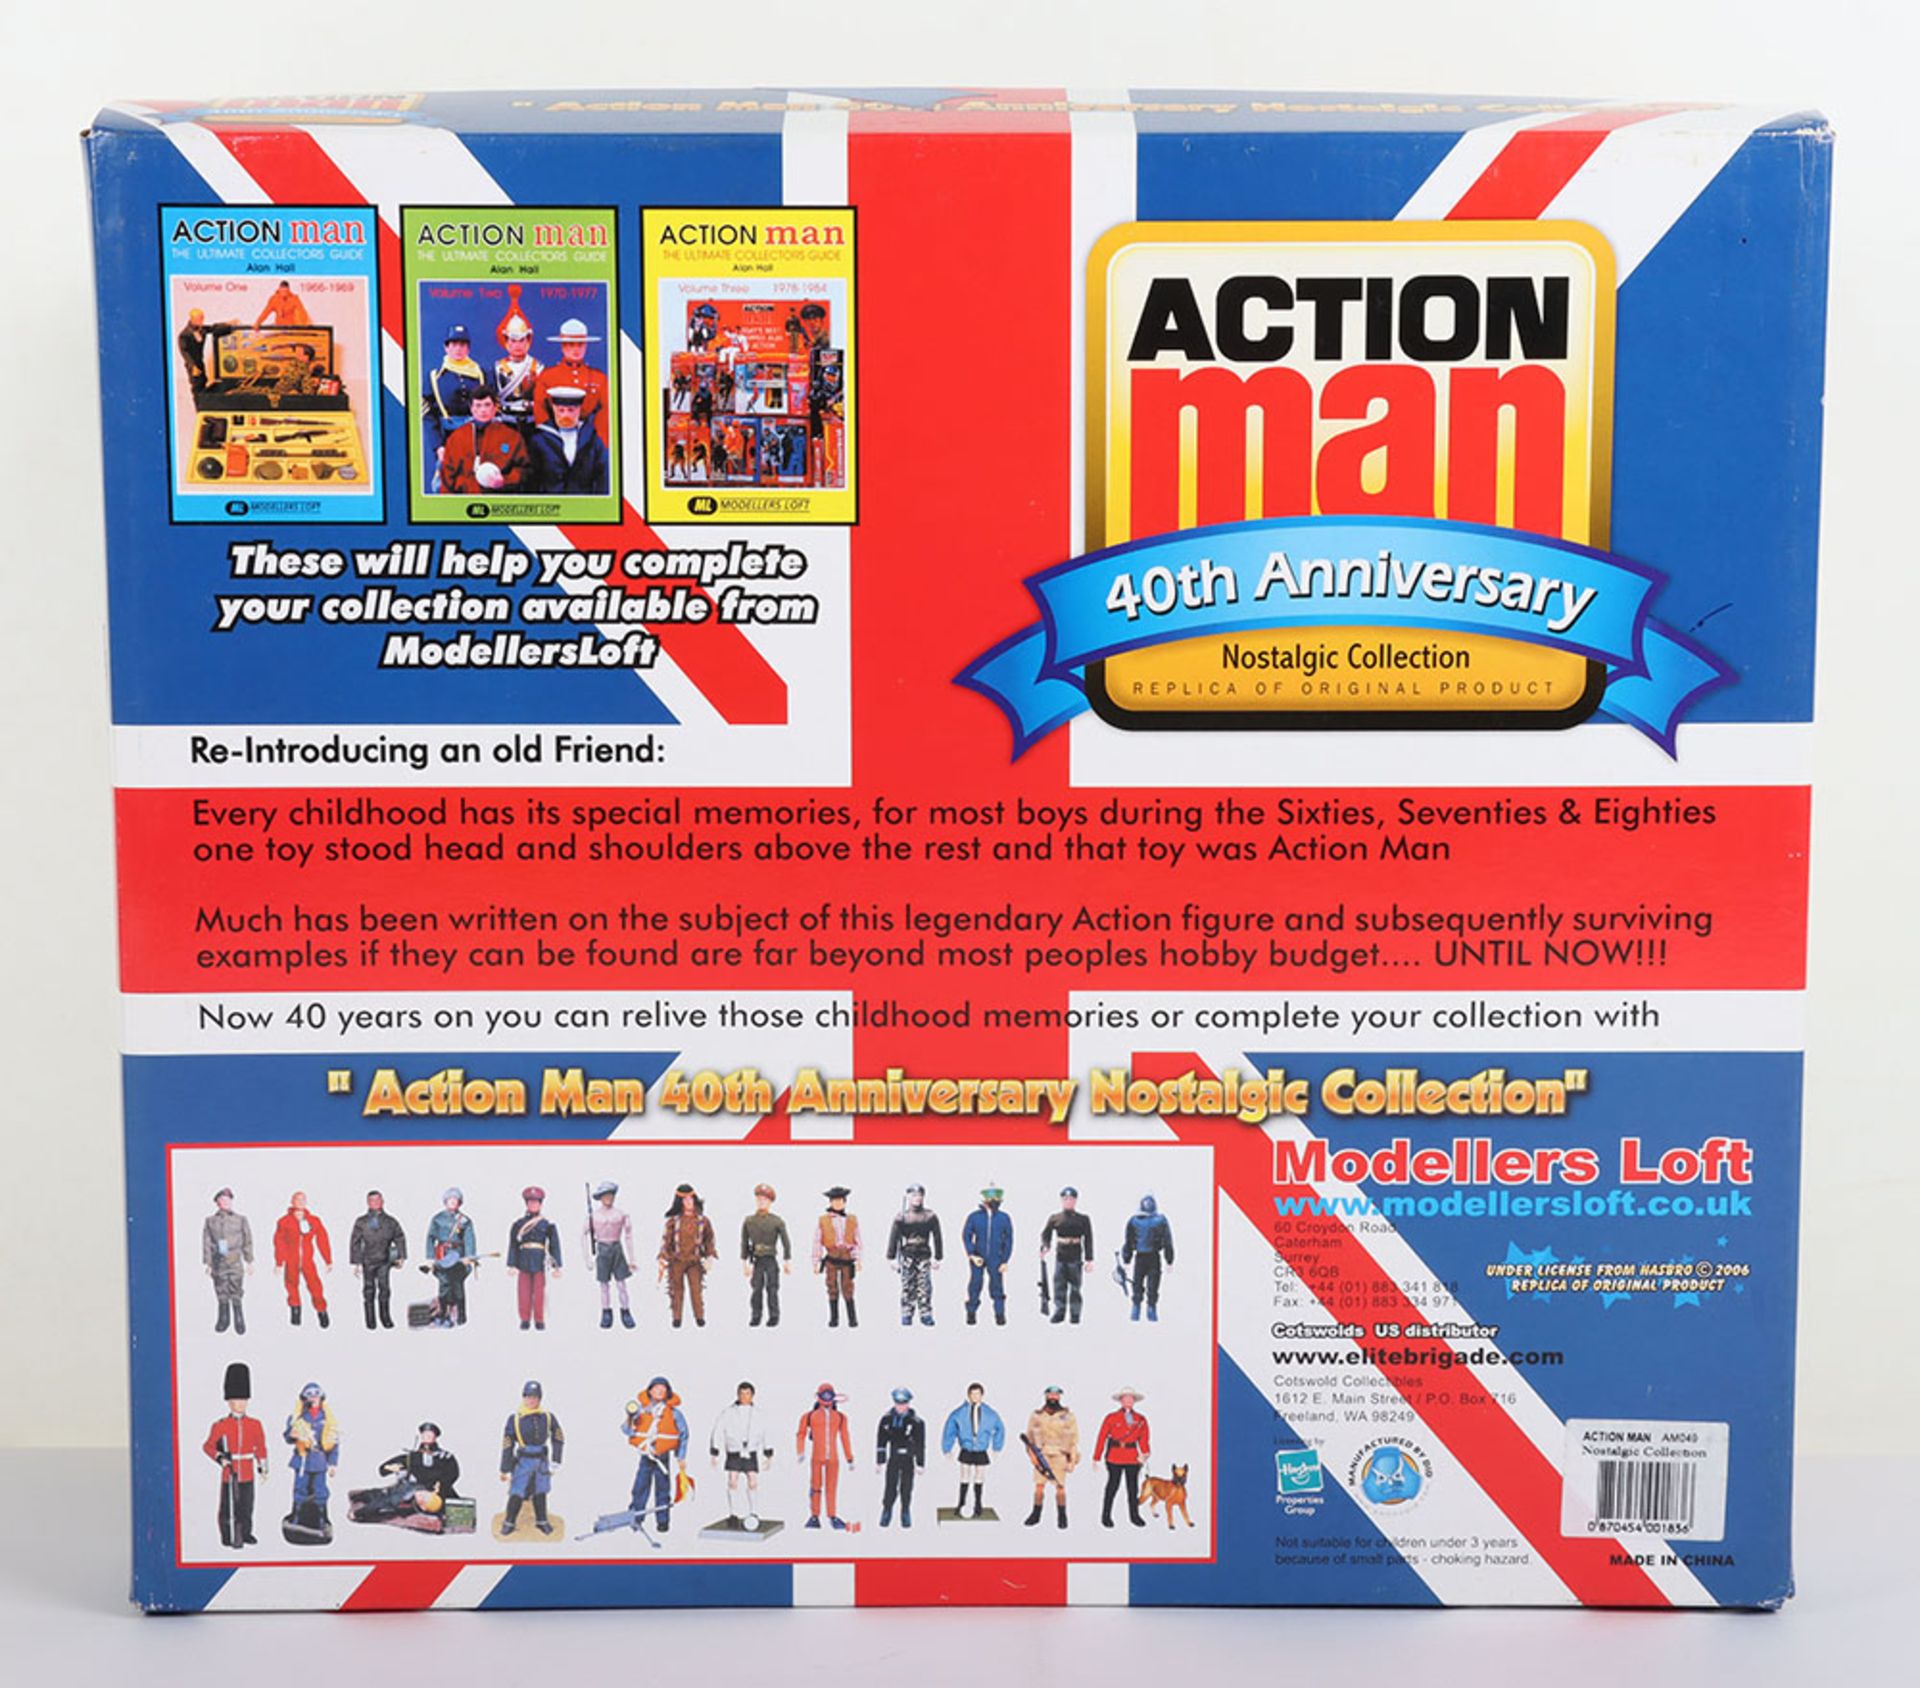 Action Man Palitoy Royal Hussar Set 40th Anniversary Nostalgic Collection - Image 2 of 2